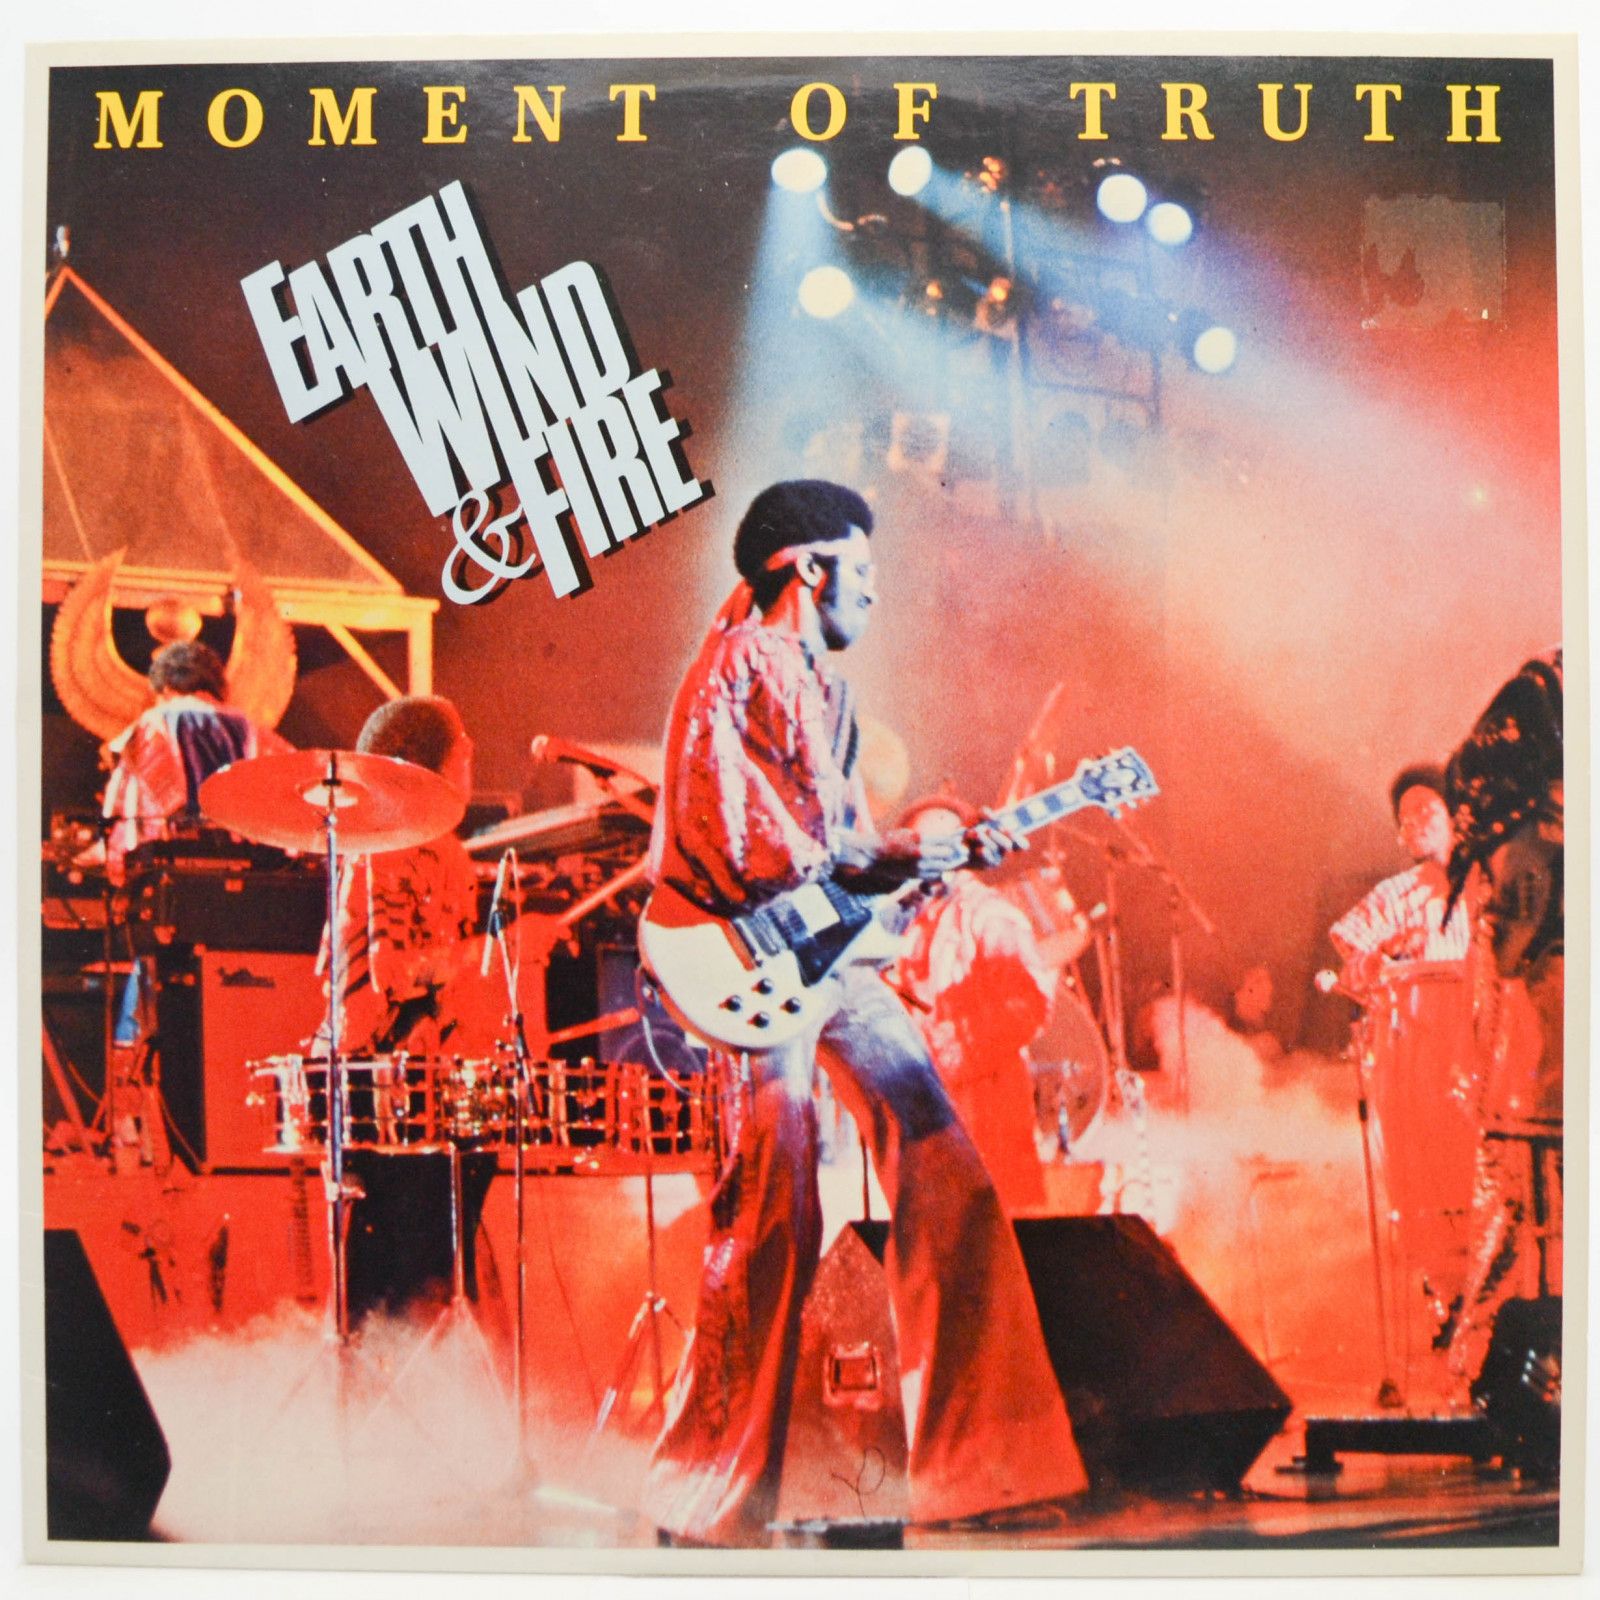 Earth Wind & Fire — Moment Of Truth (UK), 1971